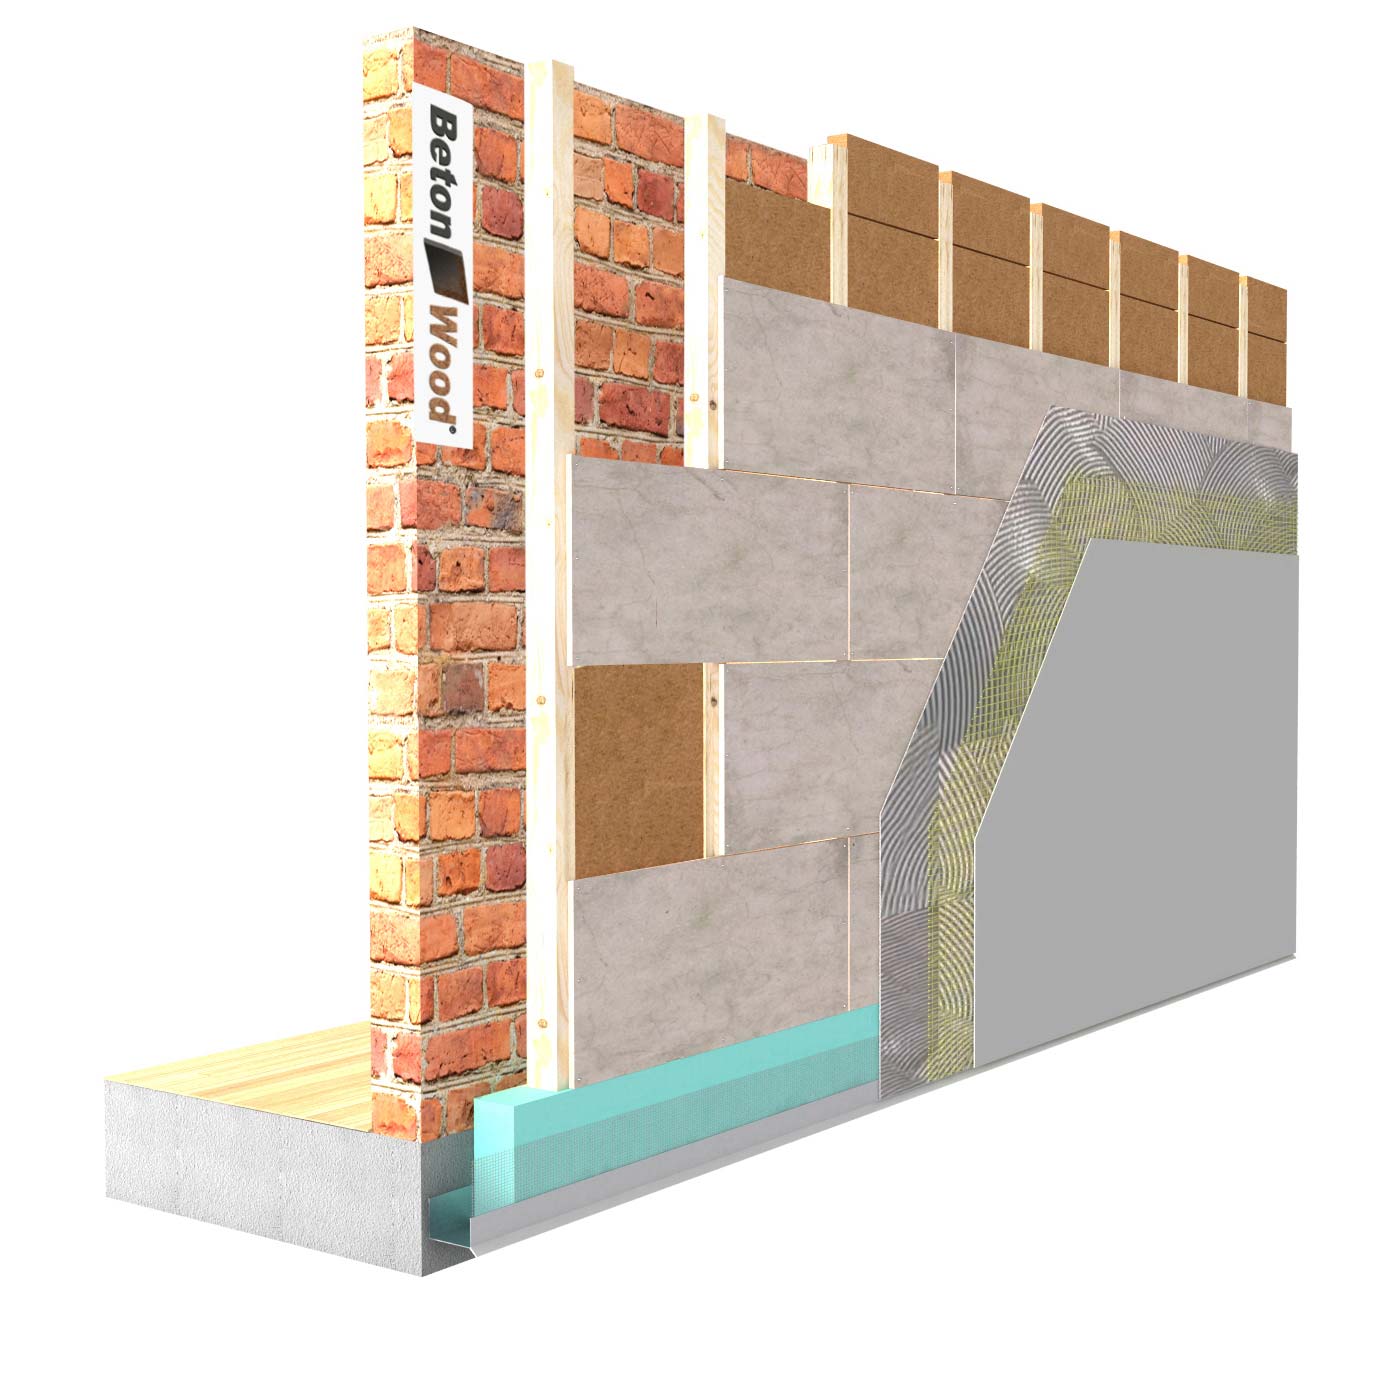 External insulation system with Therm SD fiber wood on masonry